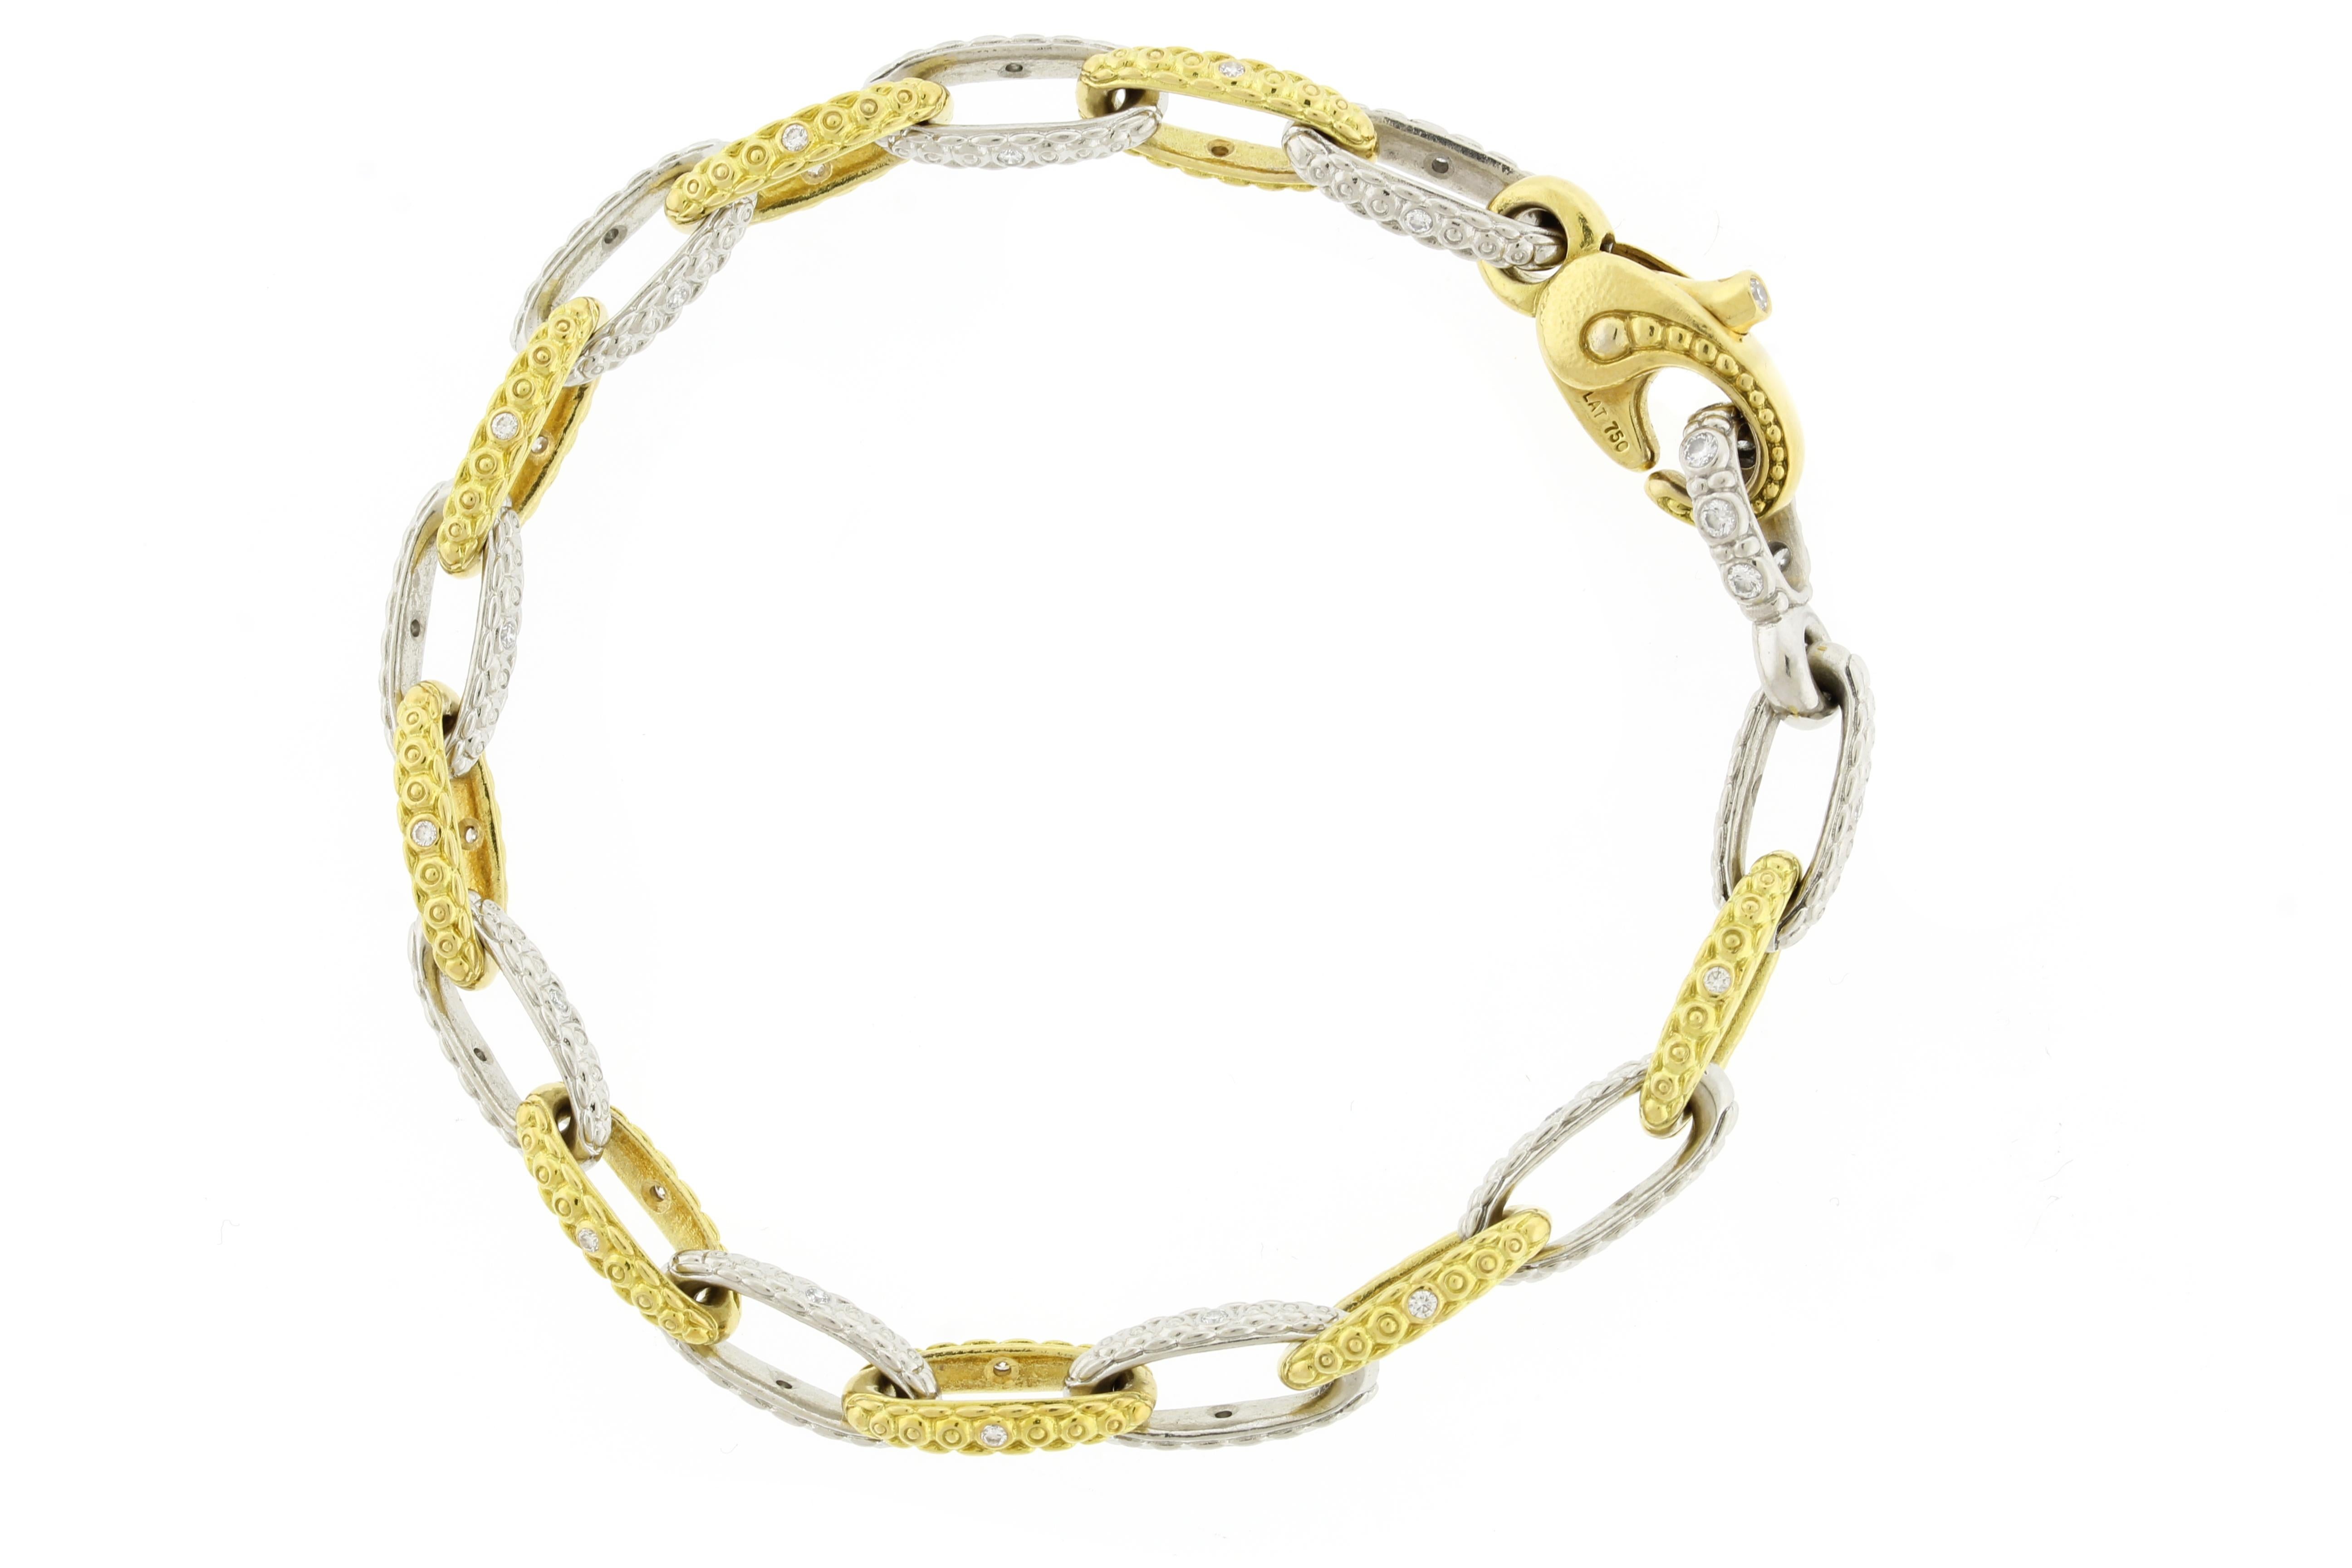  An alternating platinum and yellow gold scrolling textured chain bracelet with one diamond in each link.
• Designer: Alex Sepkus
• Metal: Platinum and 18kt yellow gold
• Circa: 2010
• Size: 7 ½
•Width: 6mm
•Weight: 28.2grams
• Diamond: 42 Diamonds=